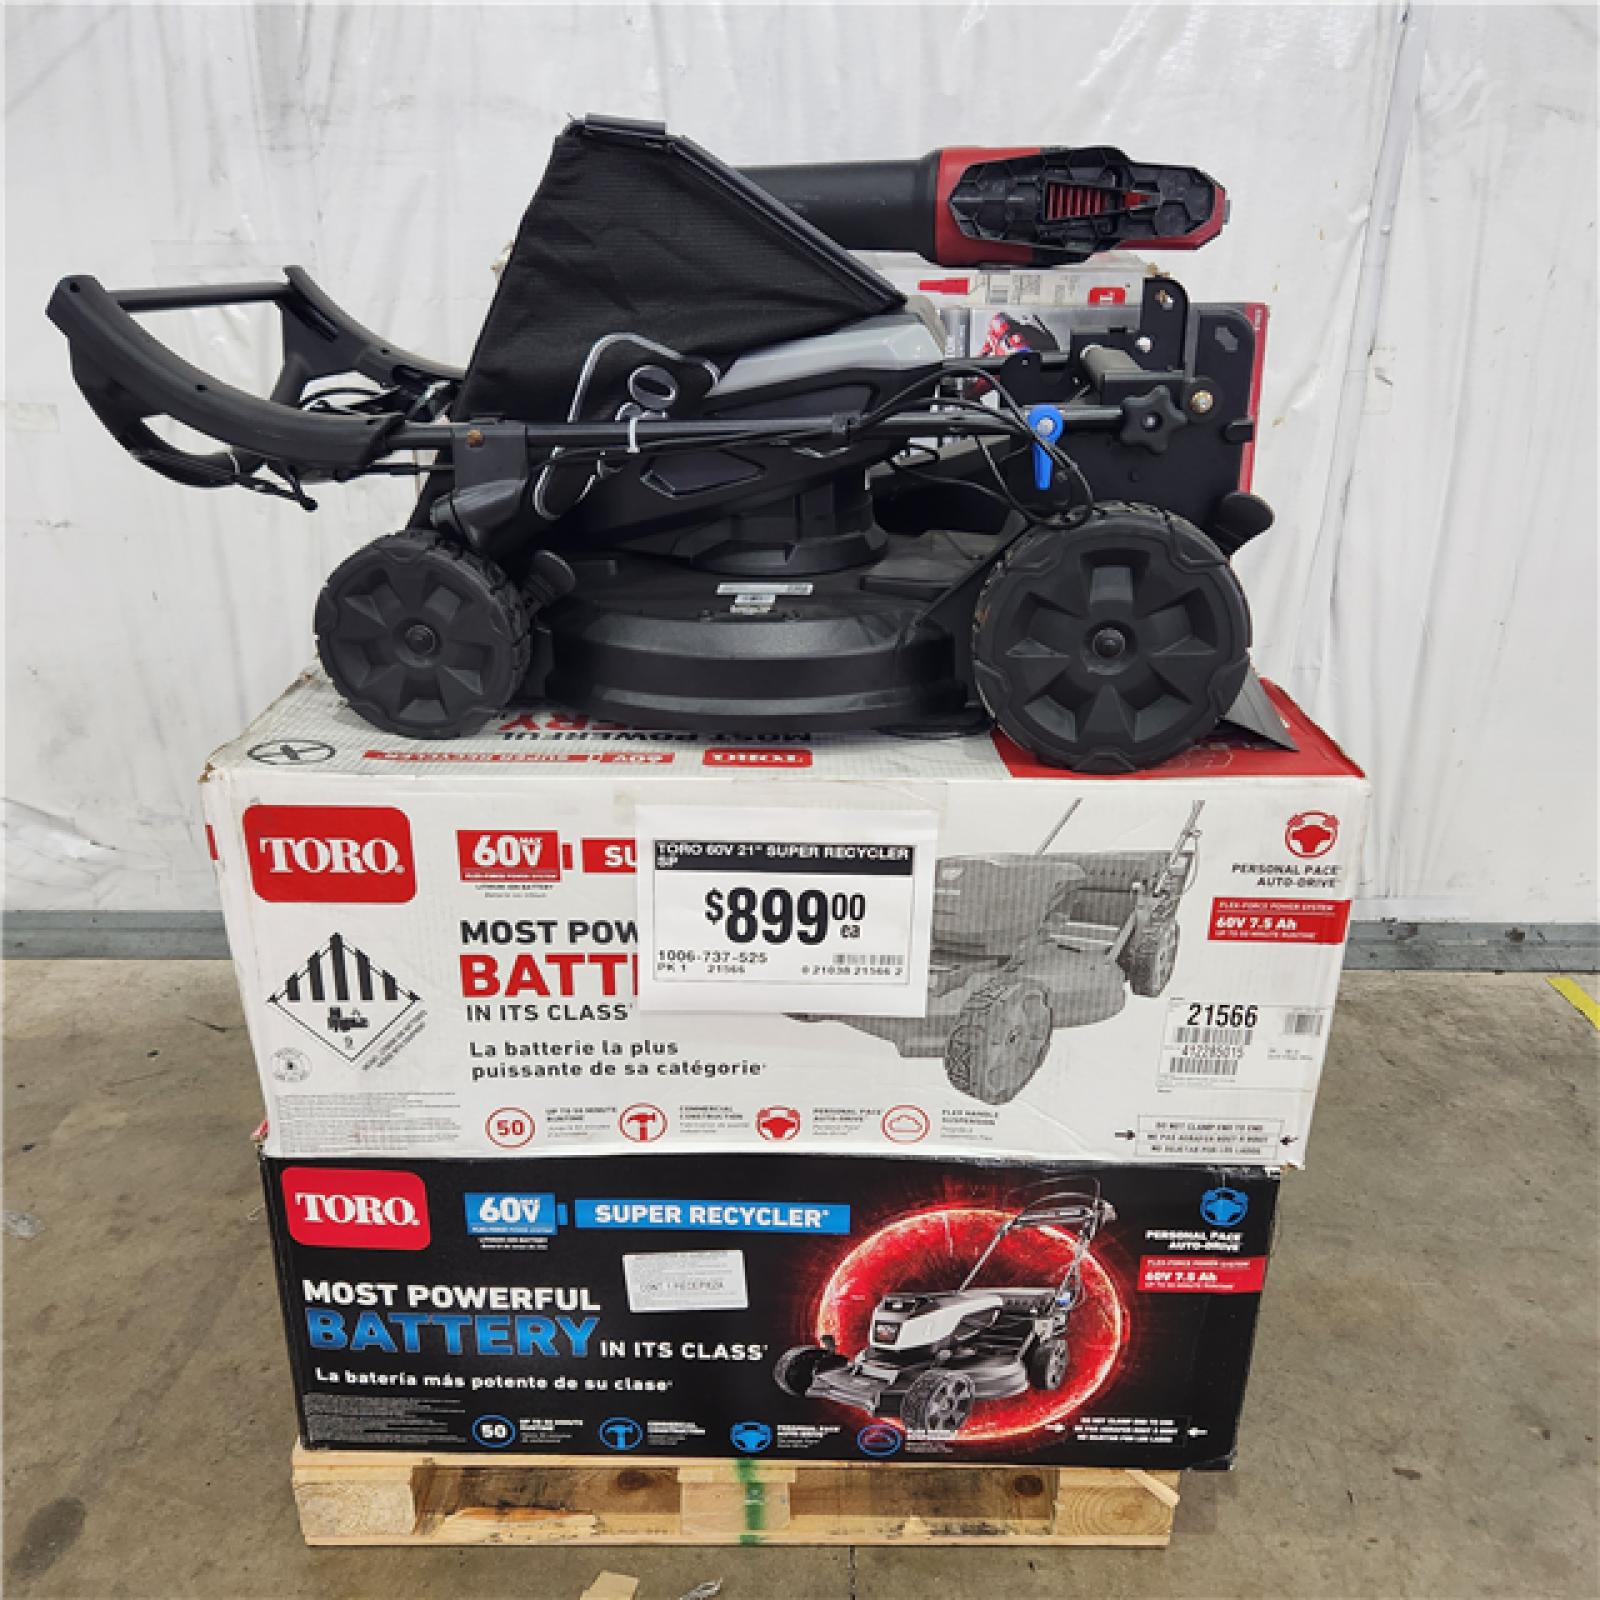 Houston Location - AS-IS Lawn Equipment Pallet (BRAND NEW)